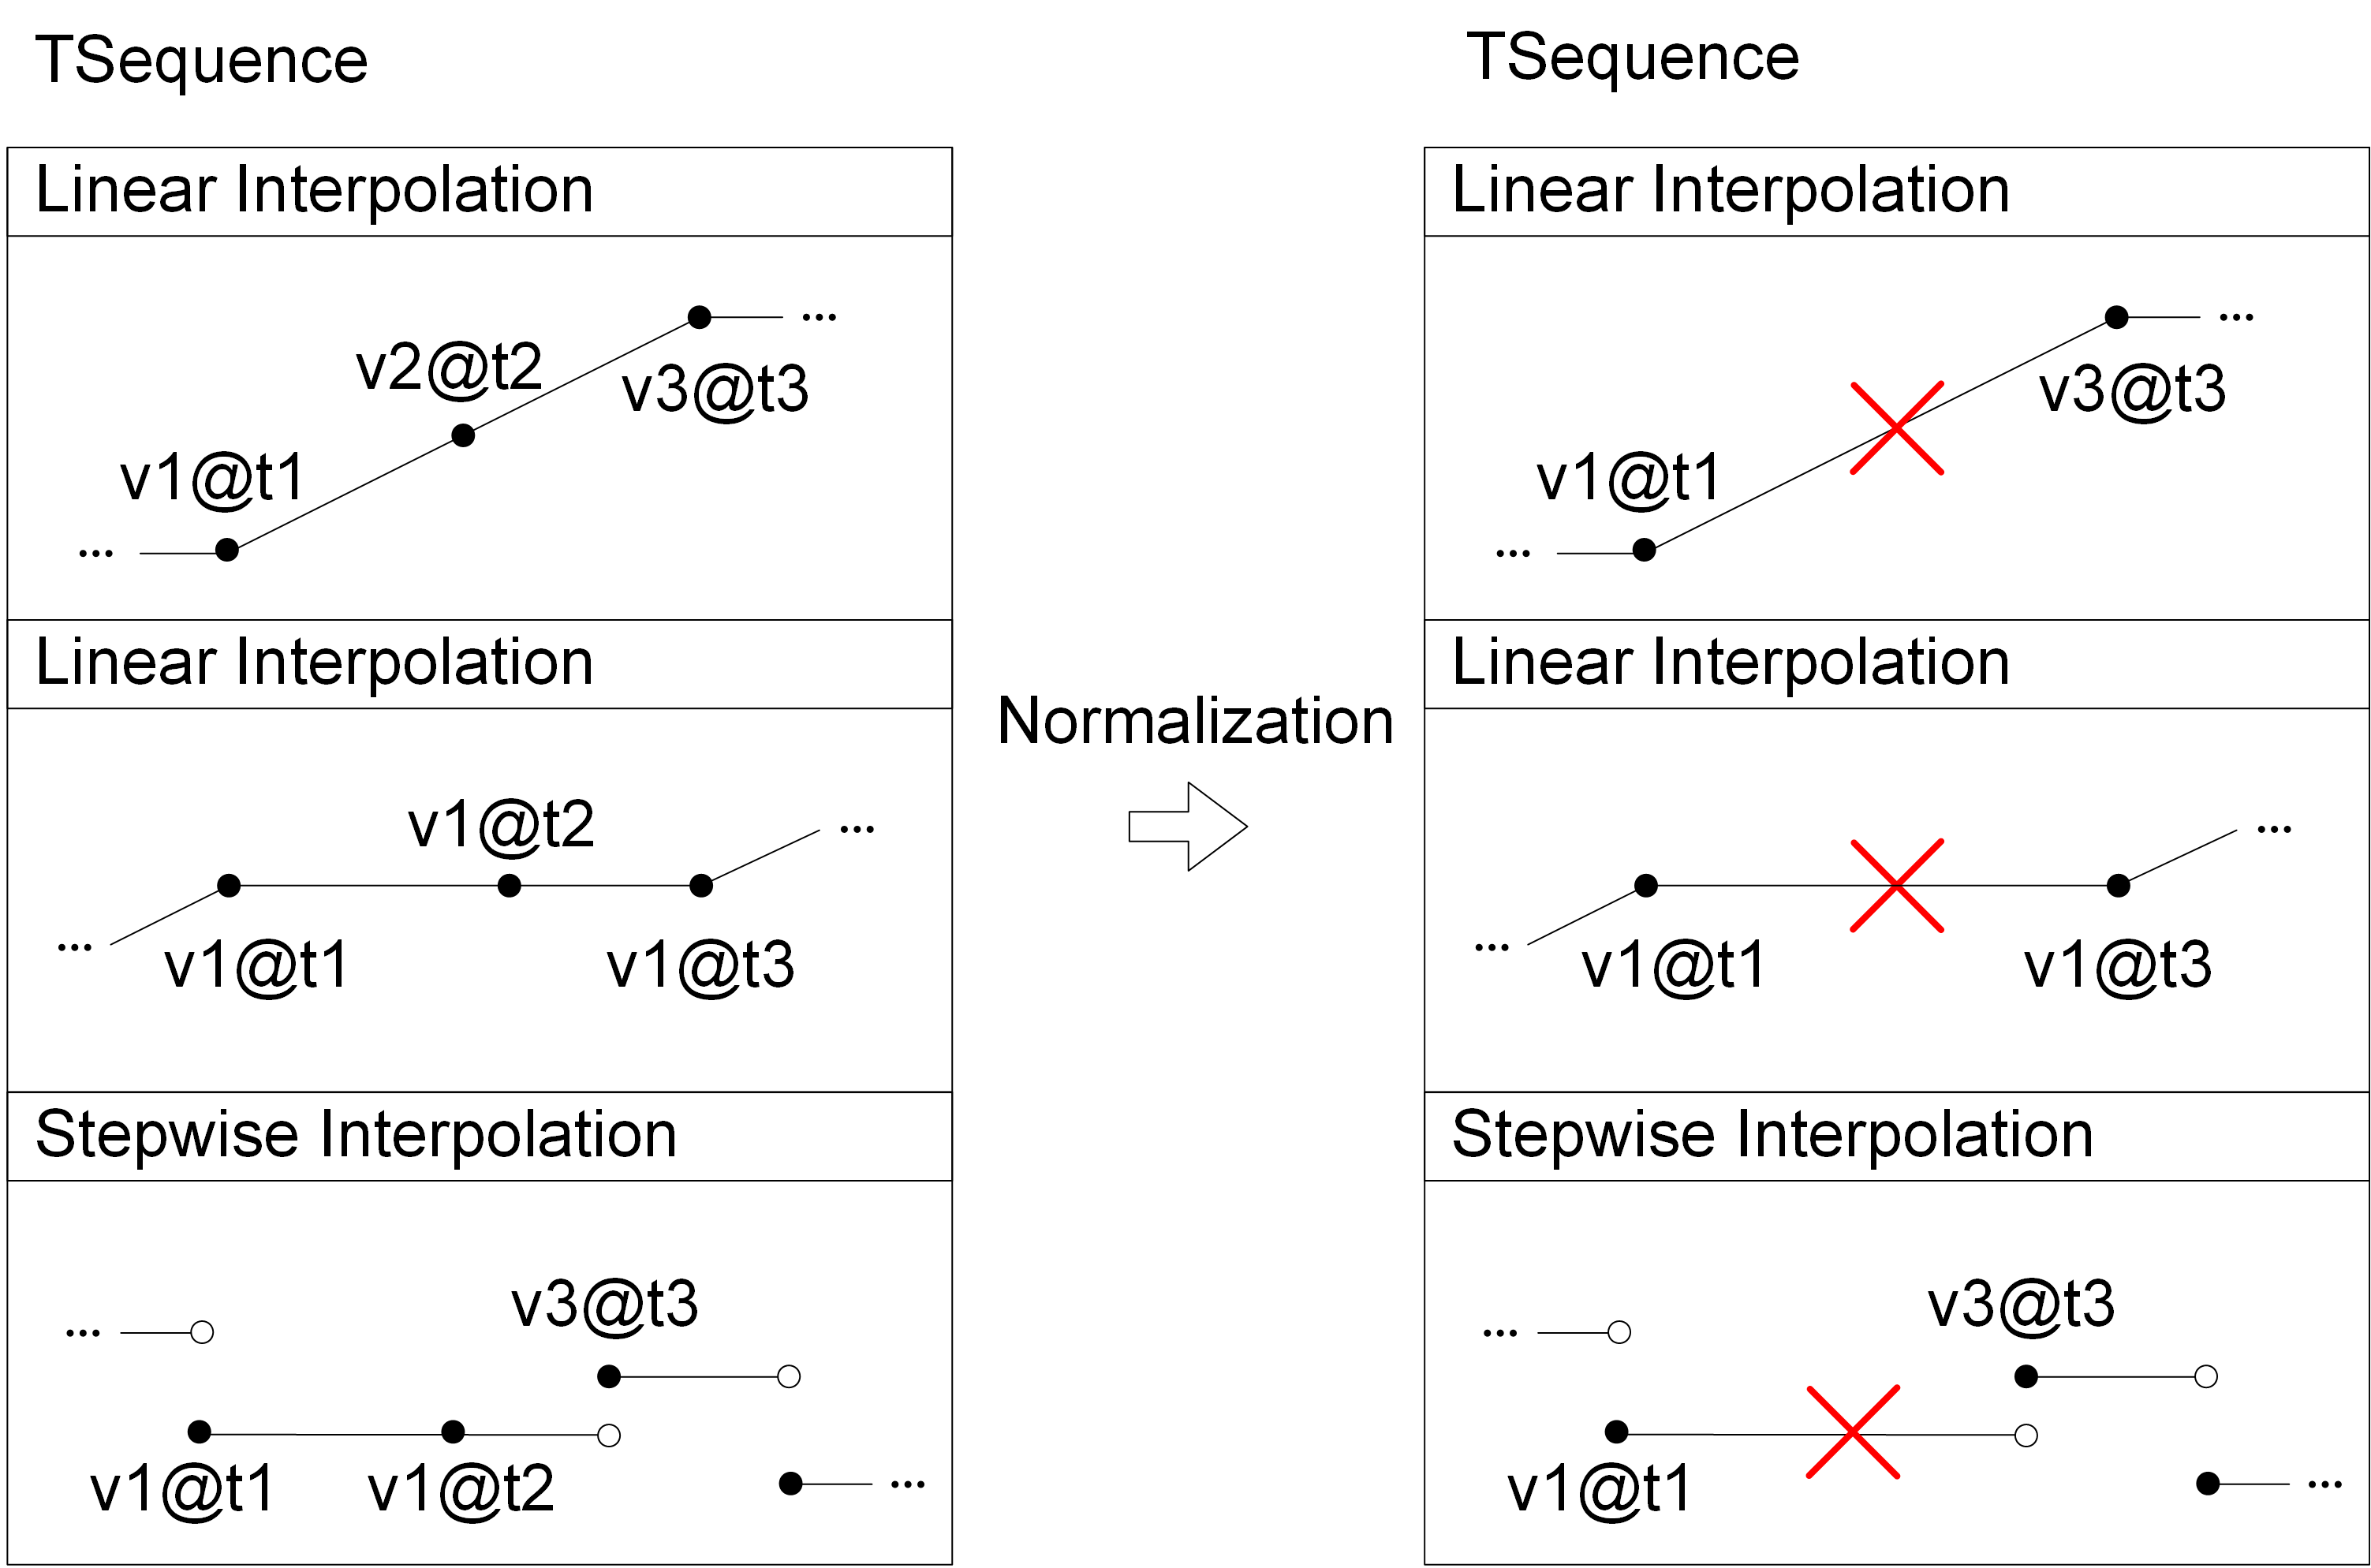 Normalization of temporal sequence values